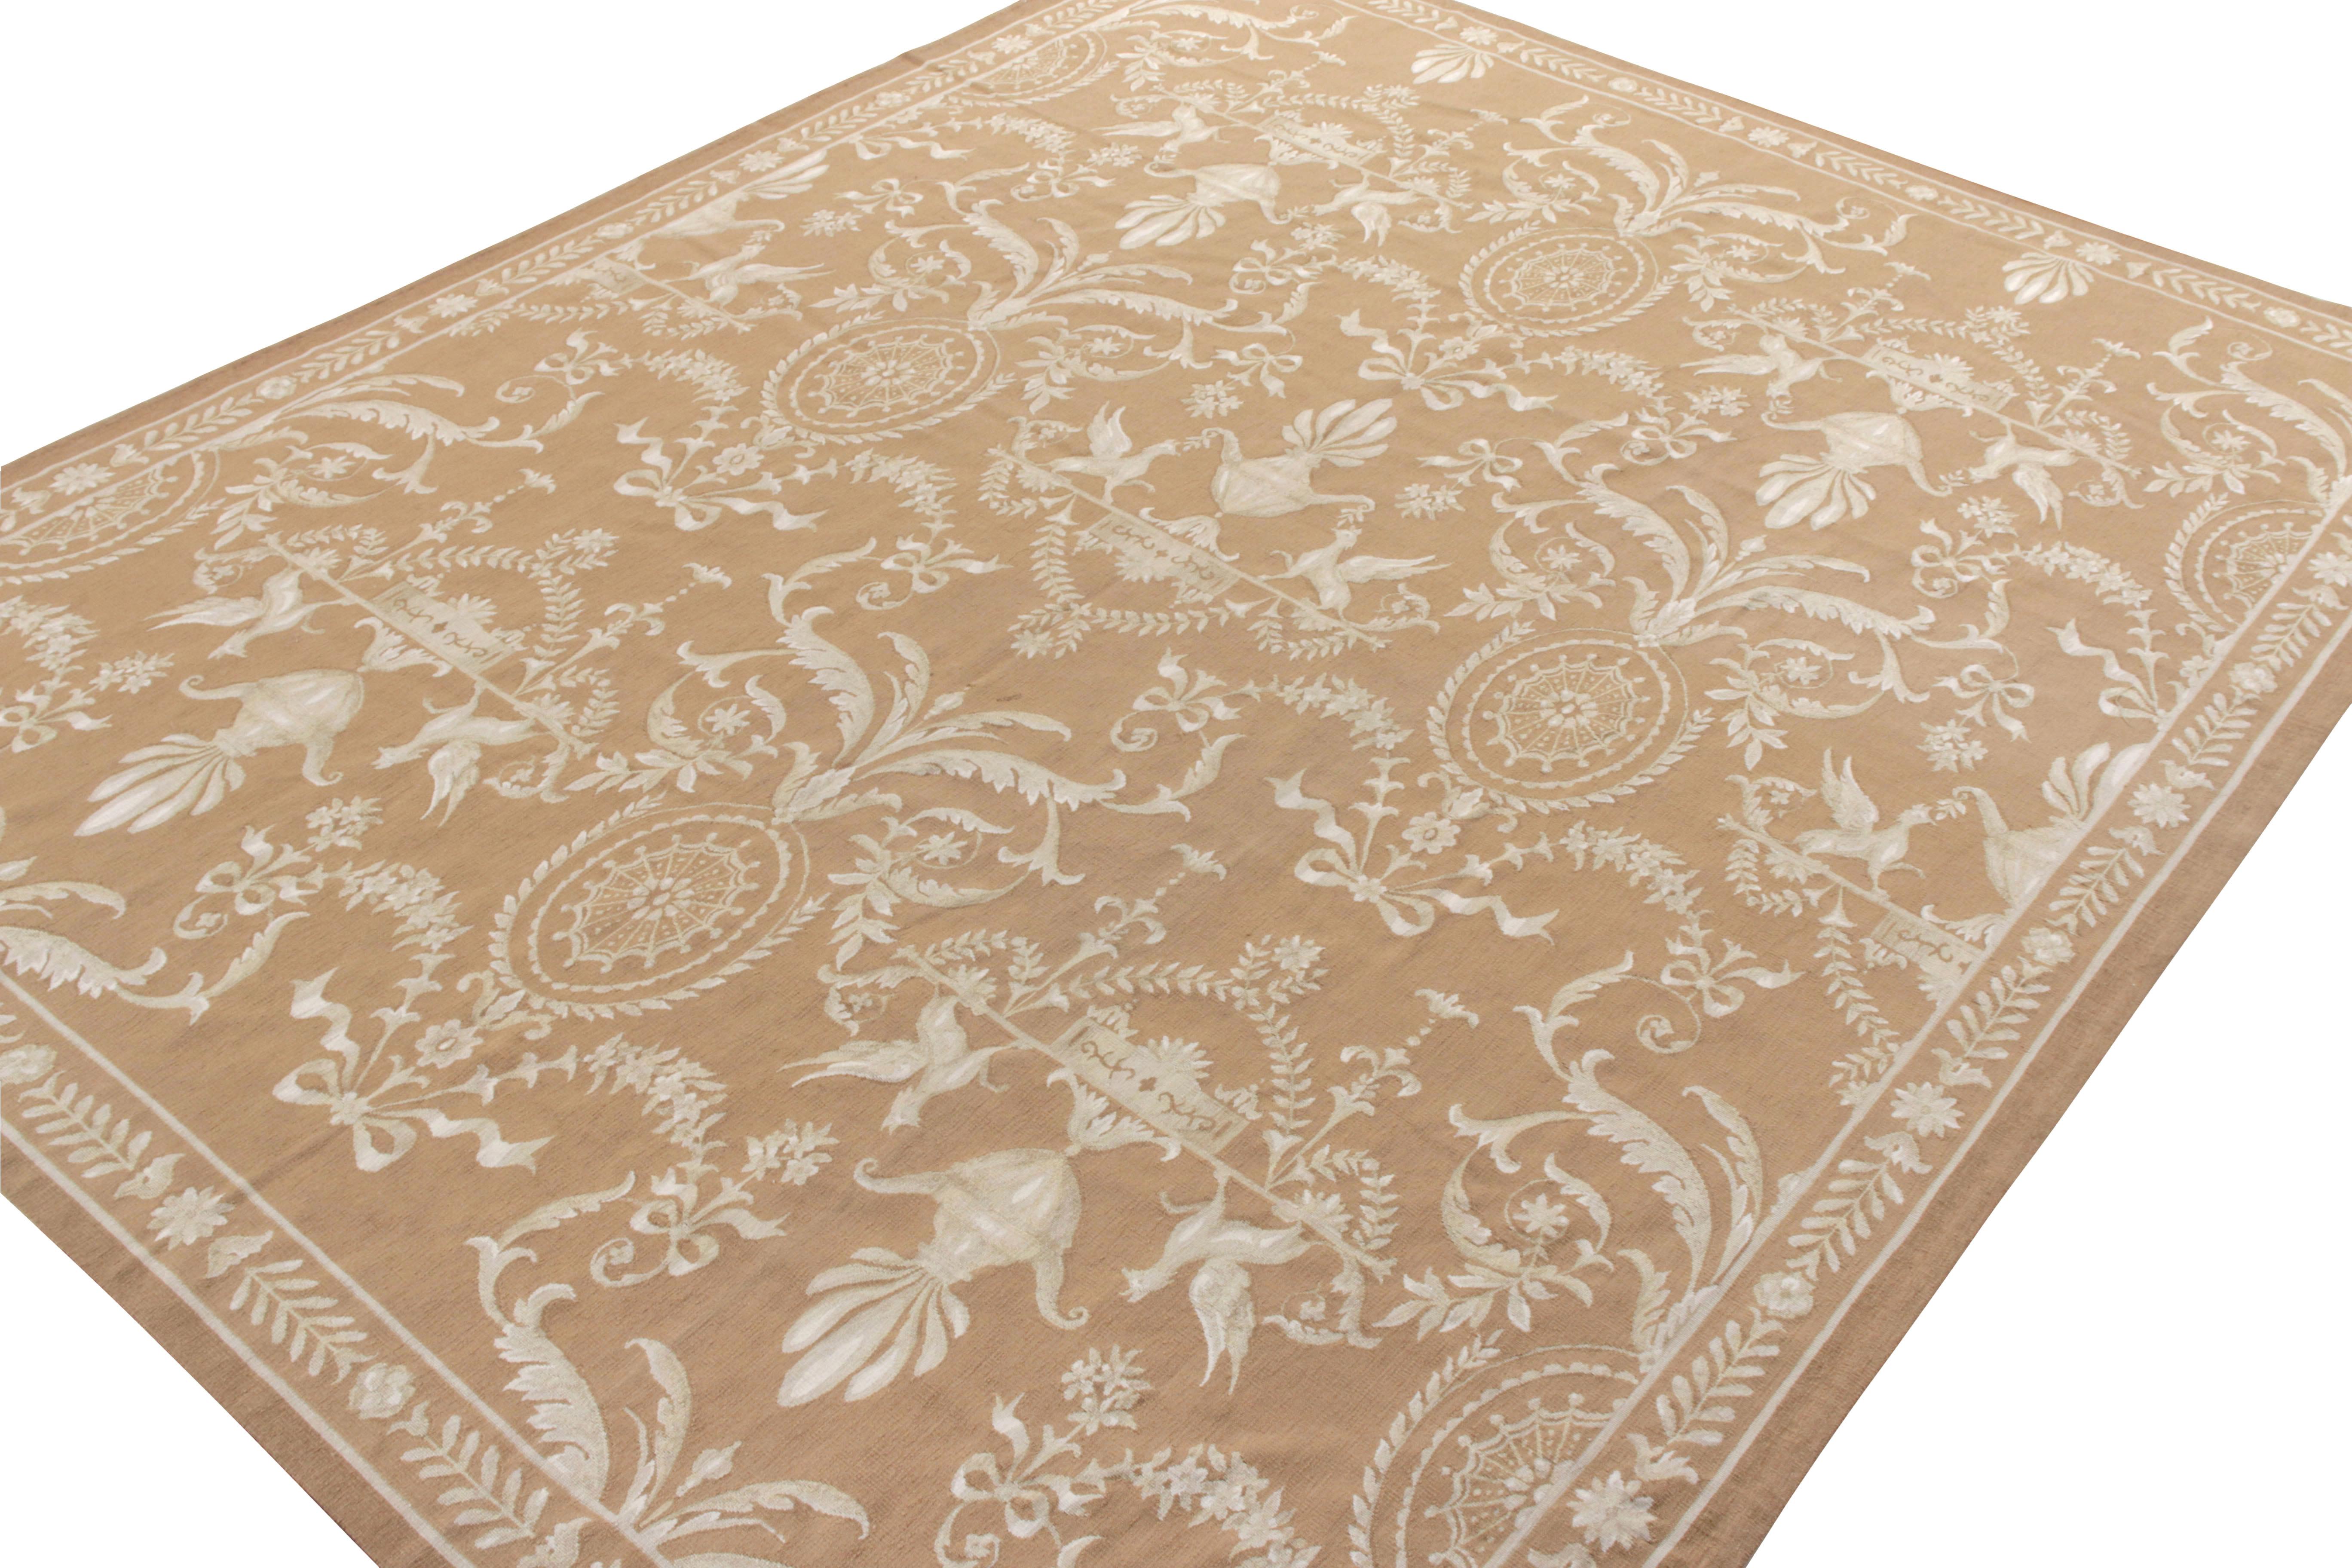 Chinese Rug & Kilim’s Aubusson Style Flat Weave in Beige-Brown, White Floral Pattern For Sale